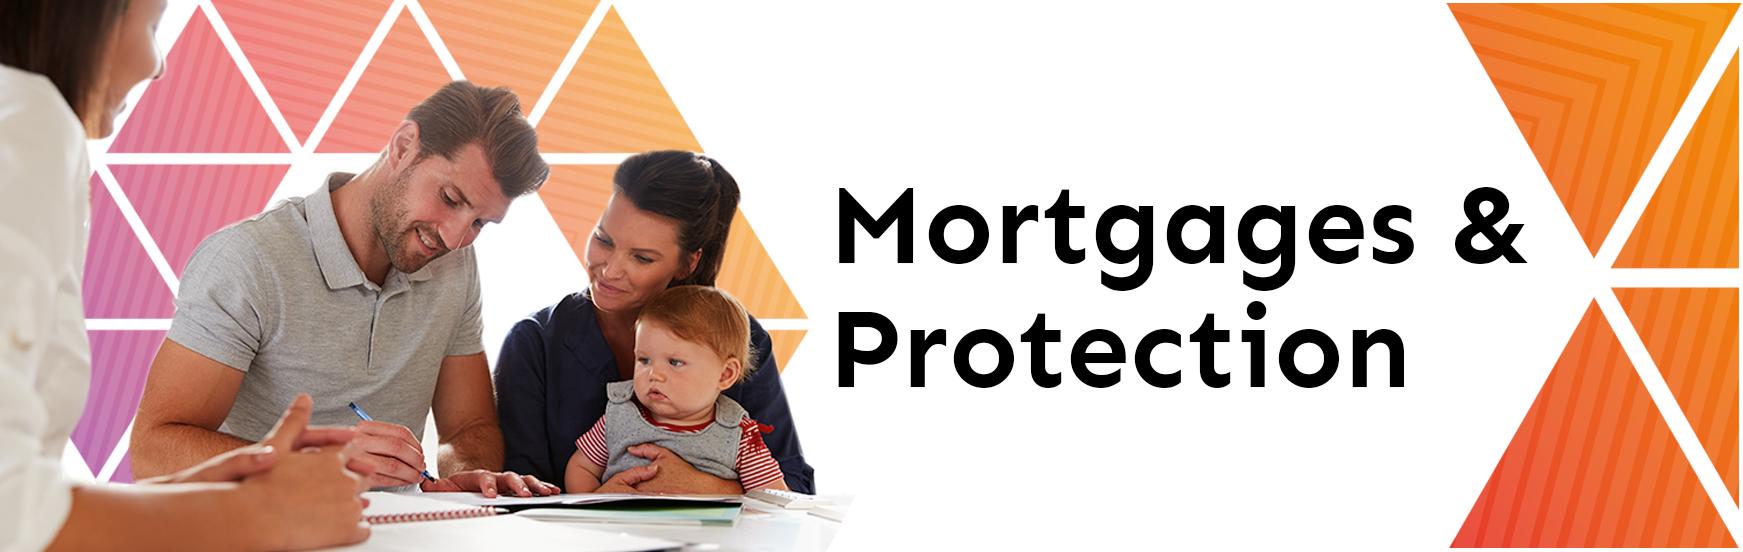 Mortgages Protection Purslow